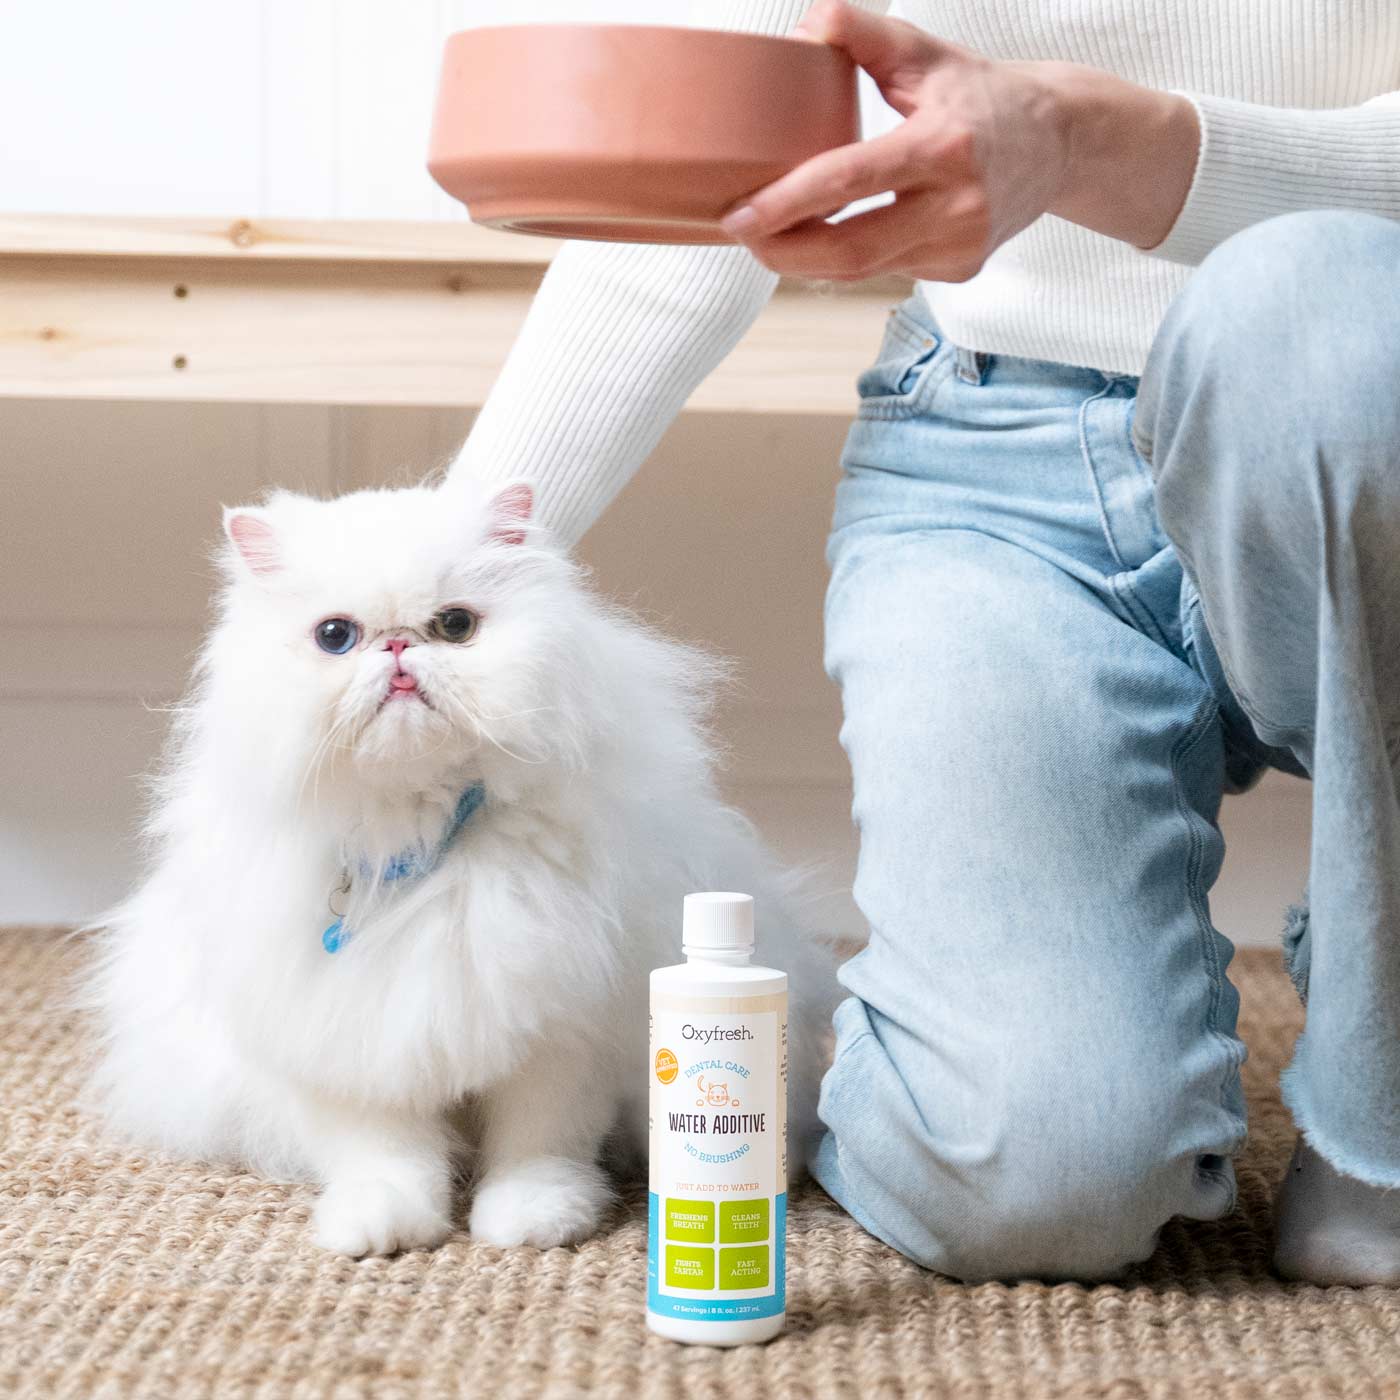 cute white cat and her owner who is about to place a bowl with oxyfresh pet water additive in front of her to freshen her breath